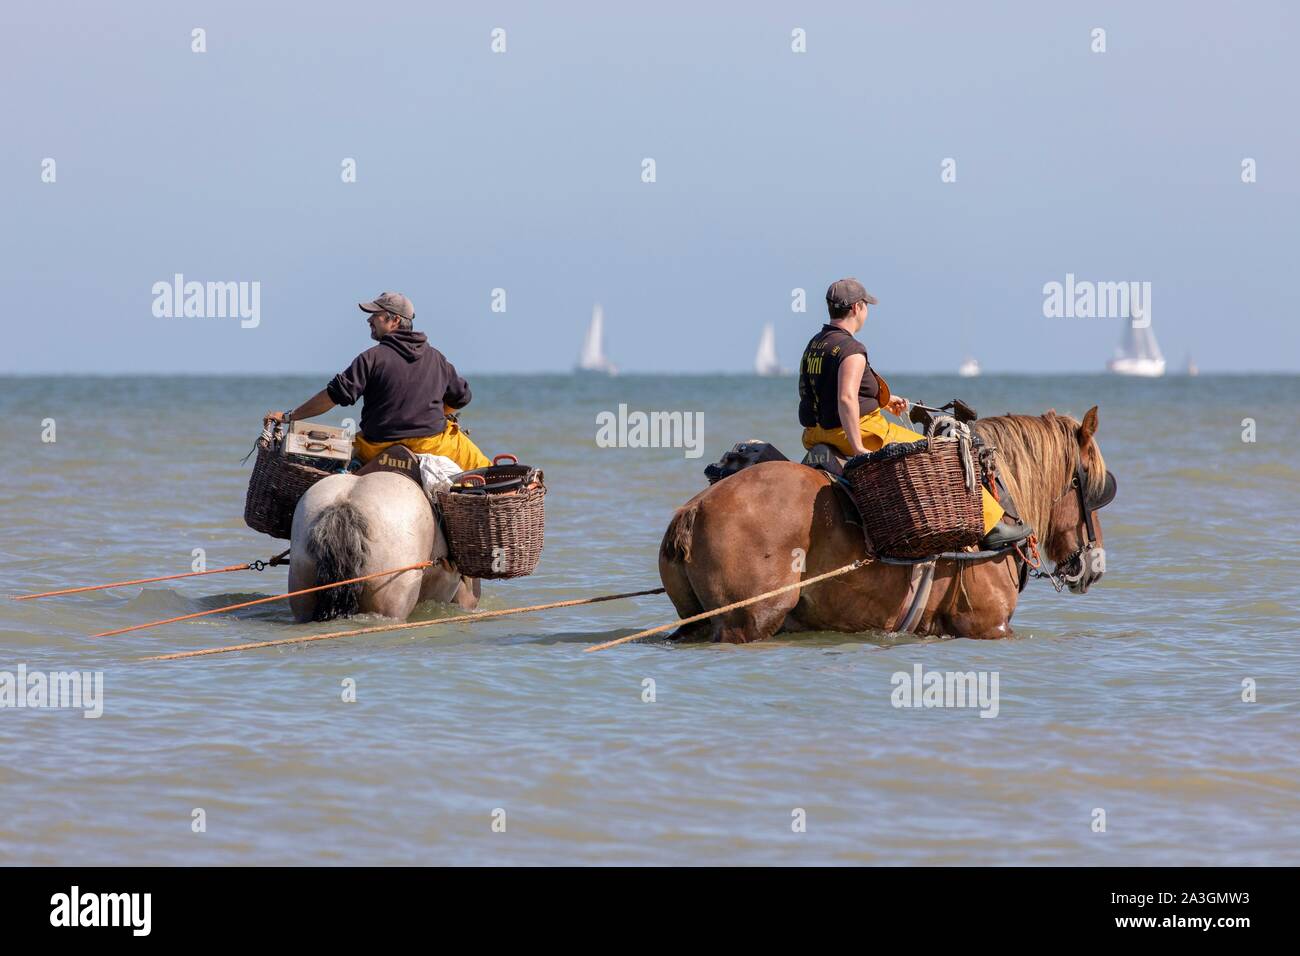 Belgium, West Flanders province, Koksijde, Oostduinkerke, the shrimp fishing on horseback is a type of fishing unique in the world, recognized as intangible cultural heritage of humanity by UNESCO in 2013 whose tradition goes back several centuries Stock Photo